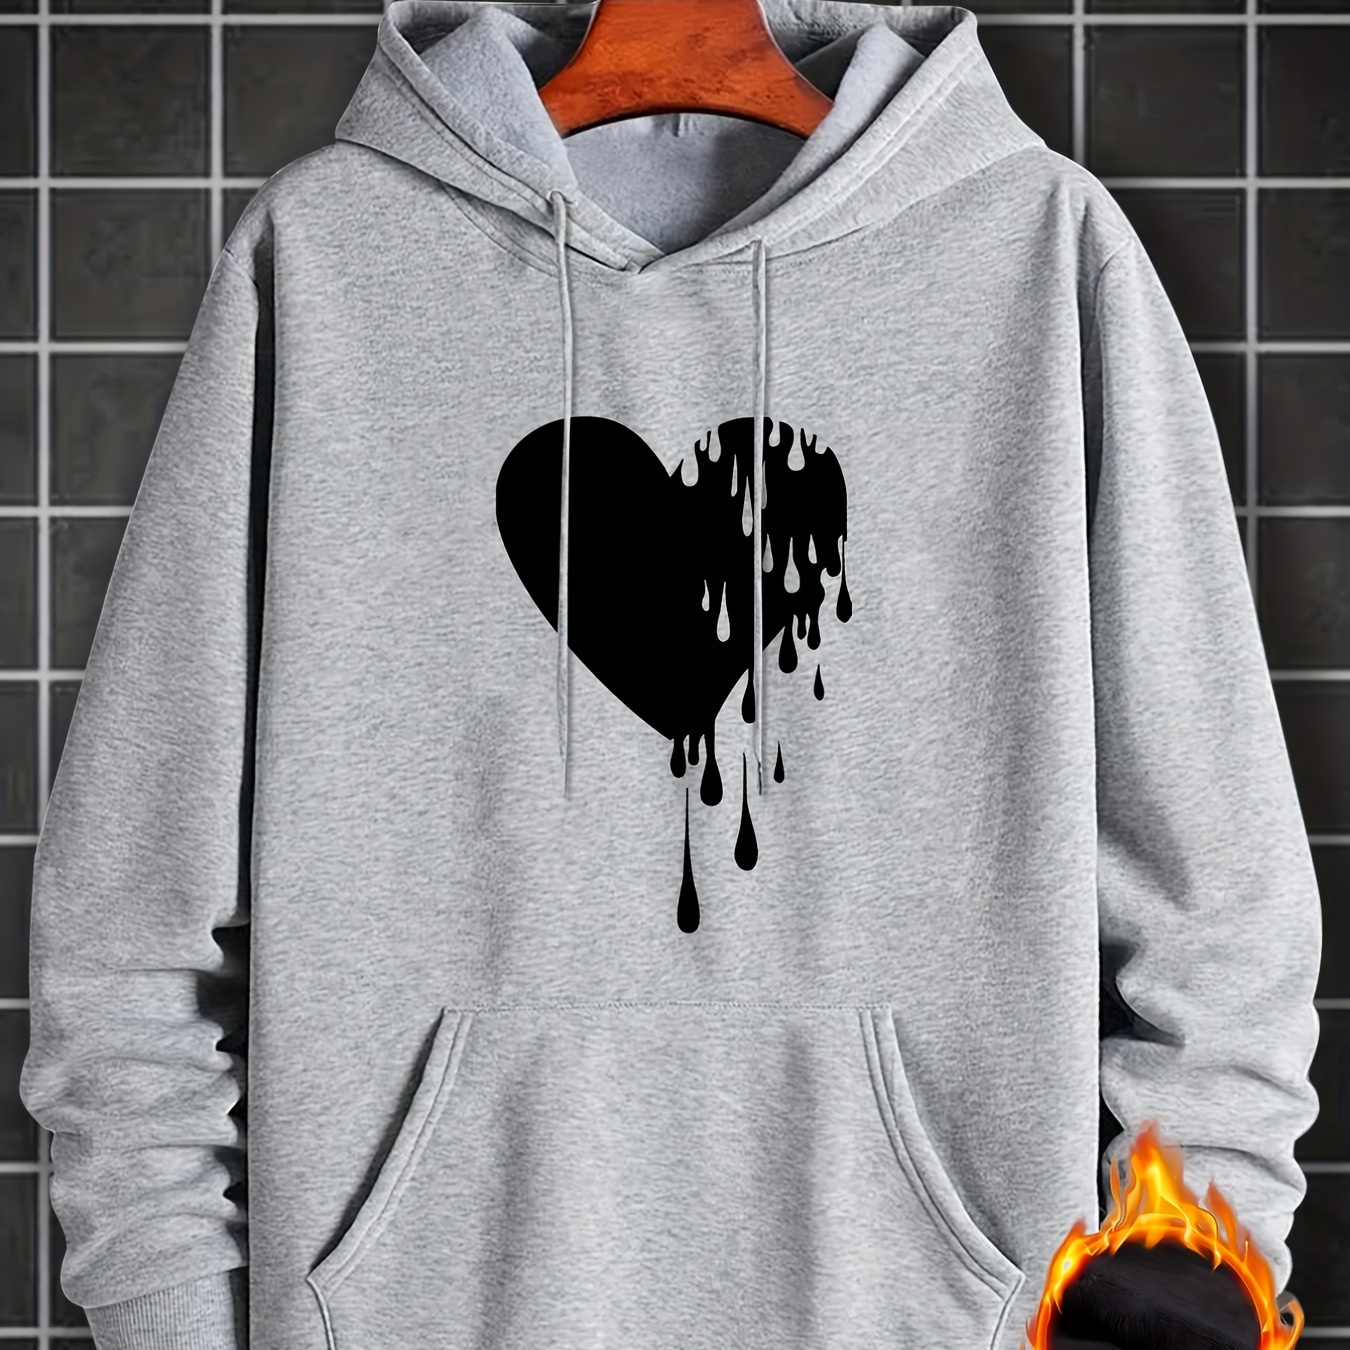 

melt Heart" Graphic Print Men's Casual Hoodies, Drawstring Comfortable Oversized Hooded Pullover Sweatshirt Plus Size